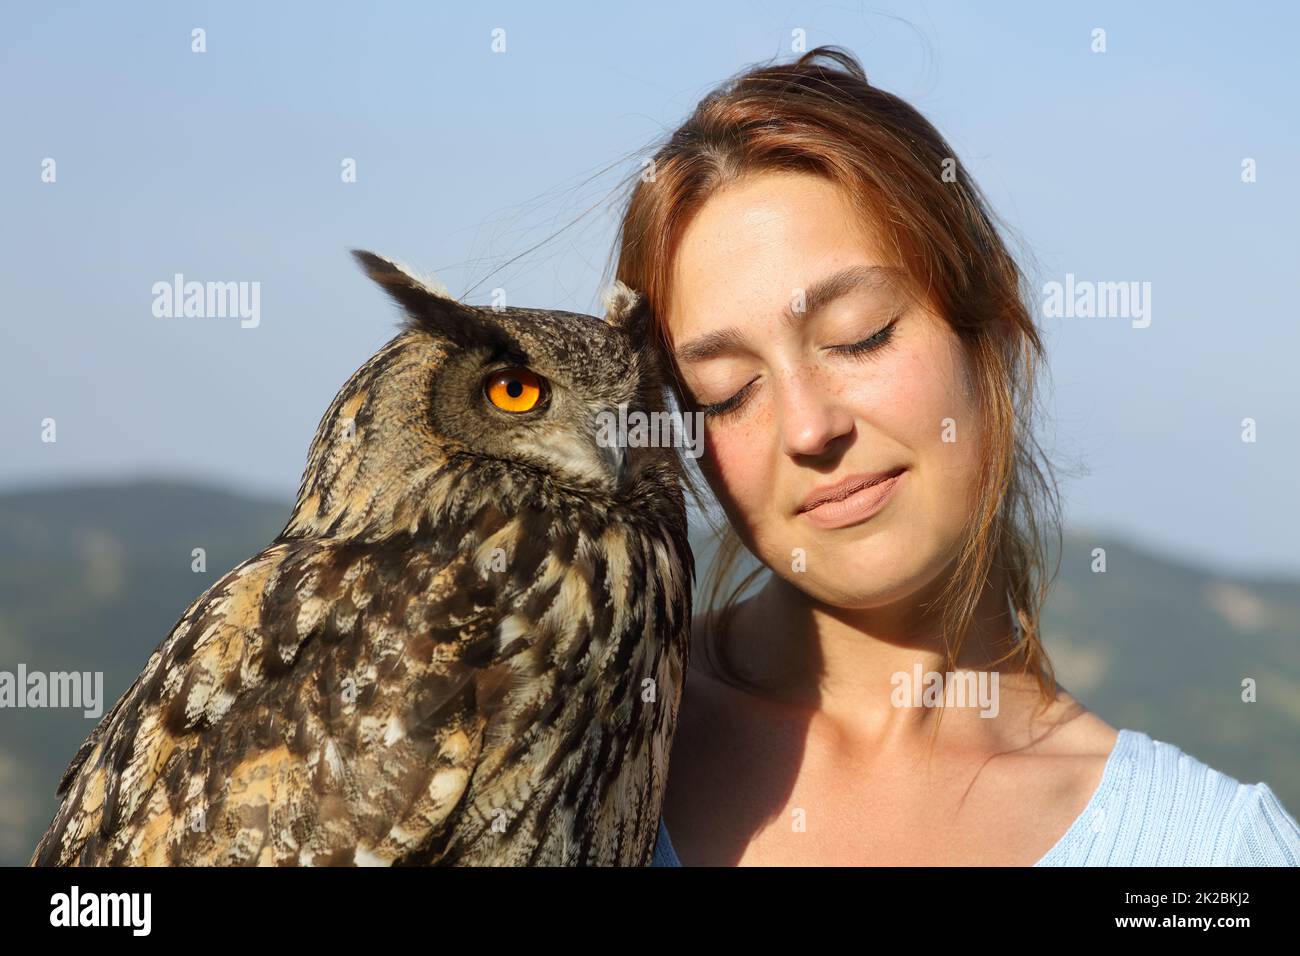 Affectionate falconer with an eagle owl outdoors Stock Photo